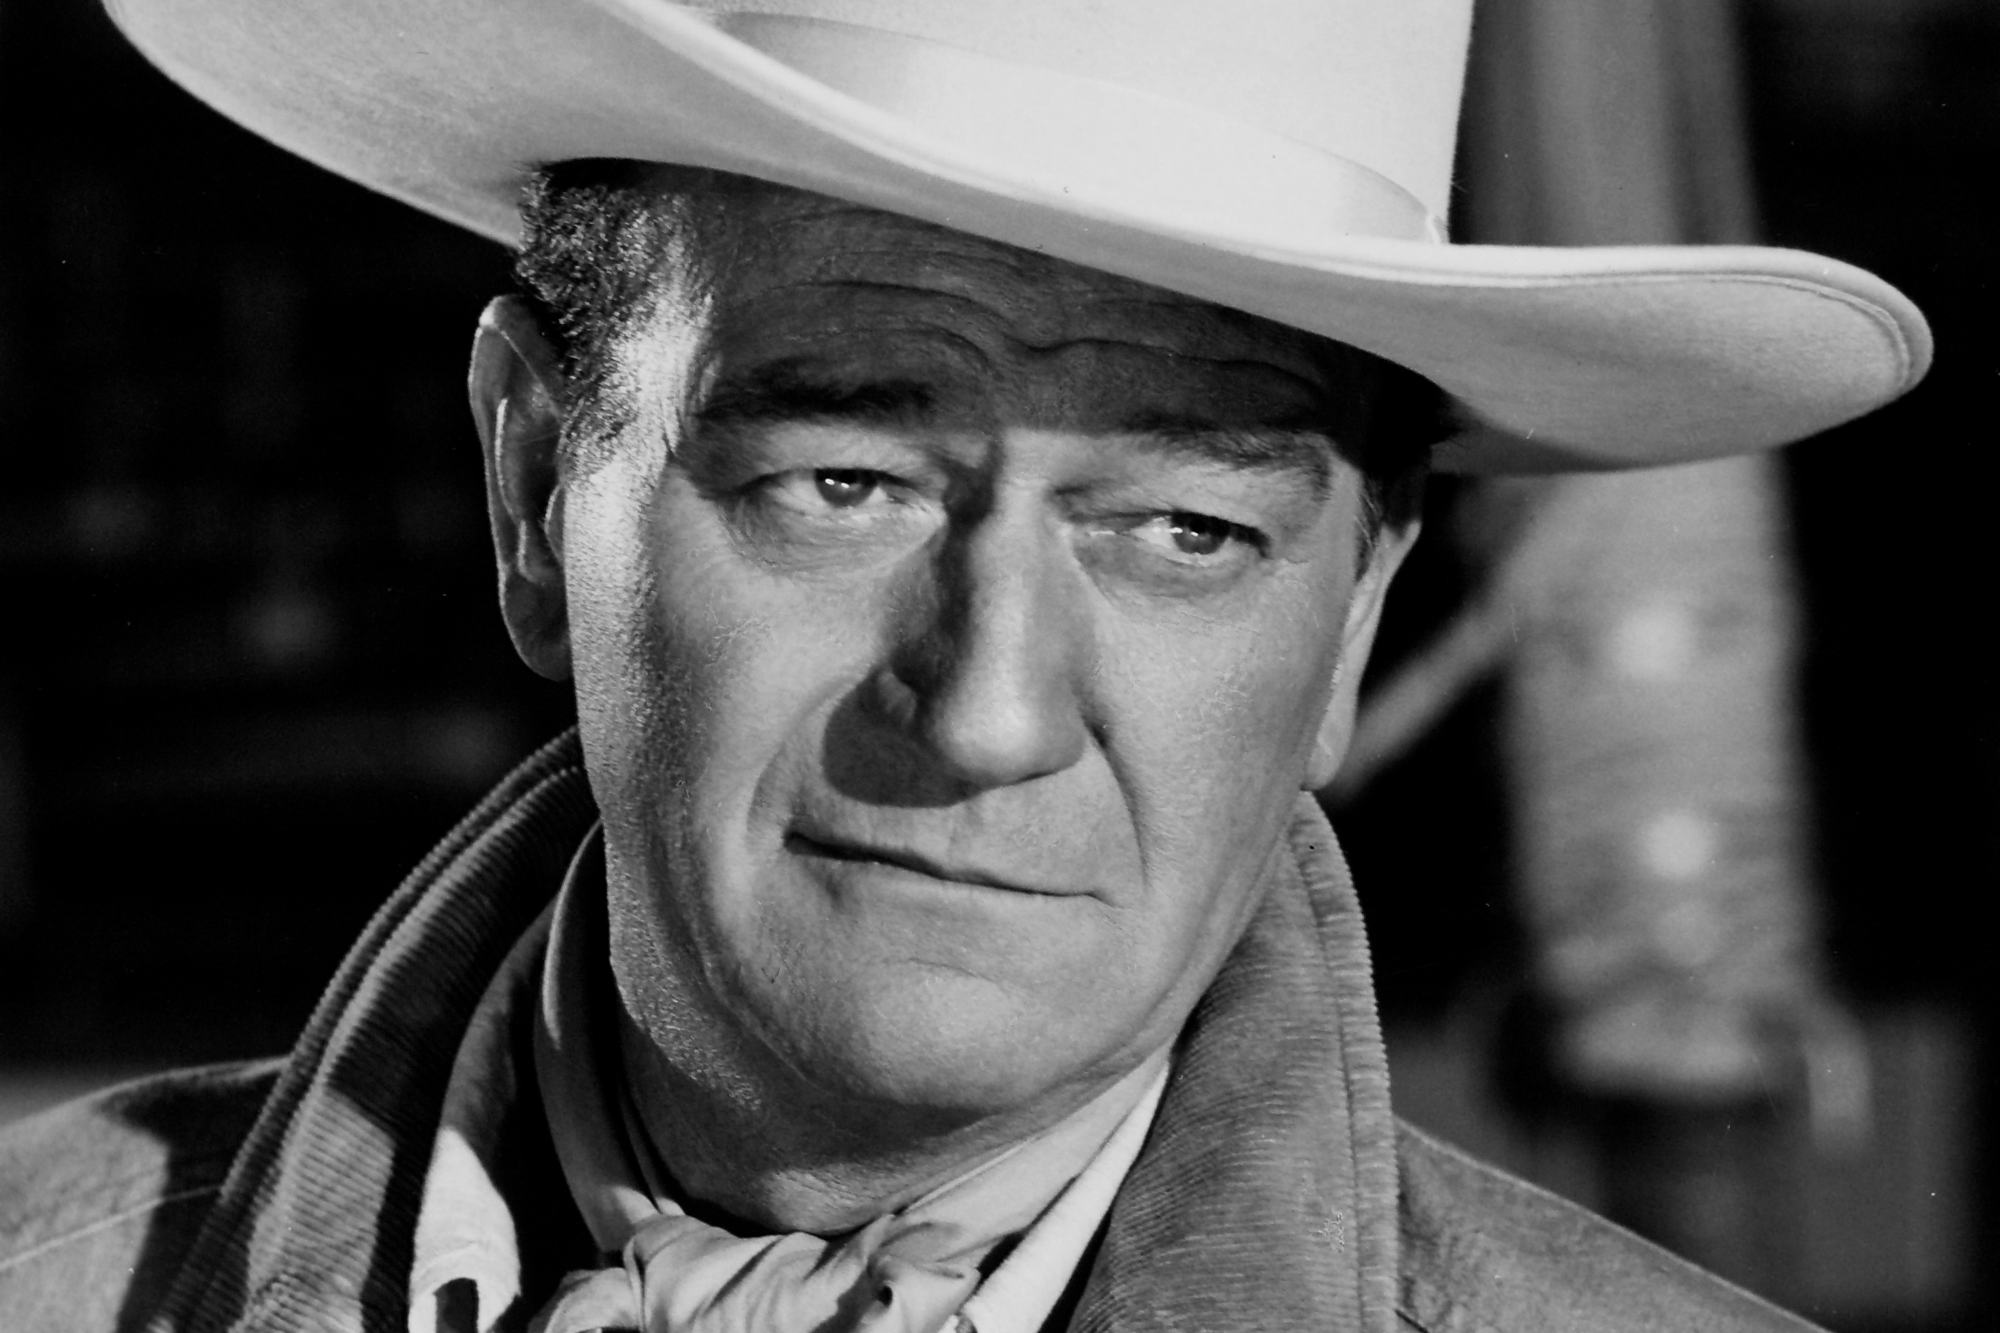 John Wayne movie 'Circus World' wearing a white cowboy hat with a slight smile on his face.